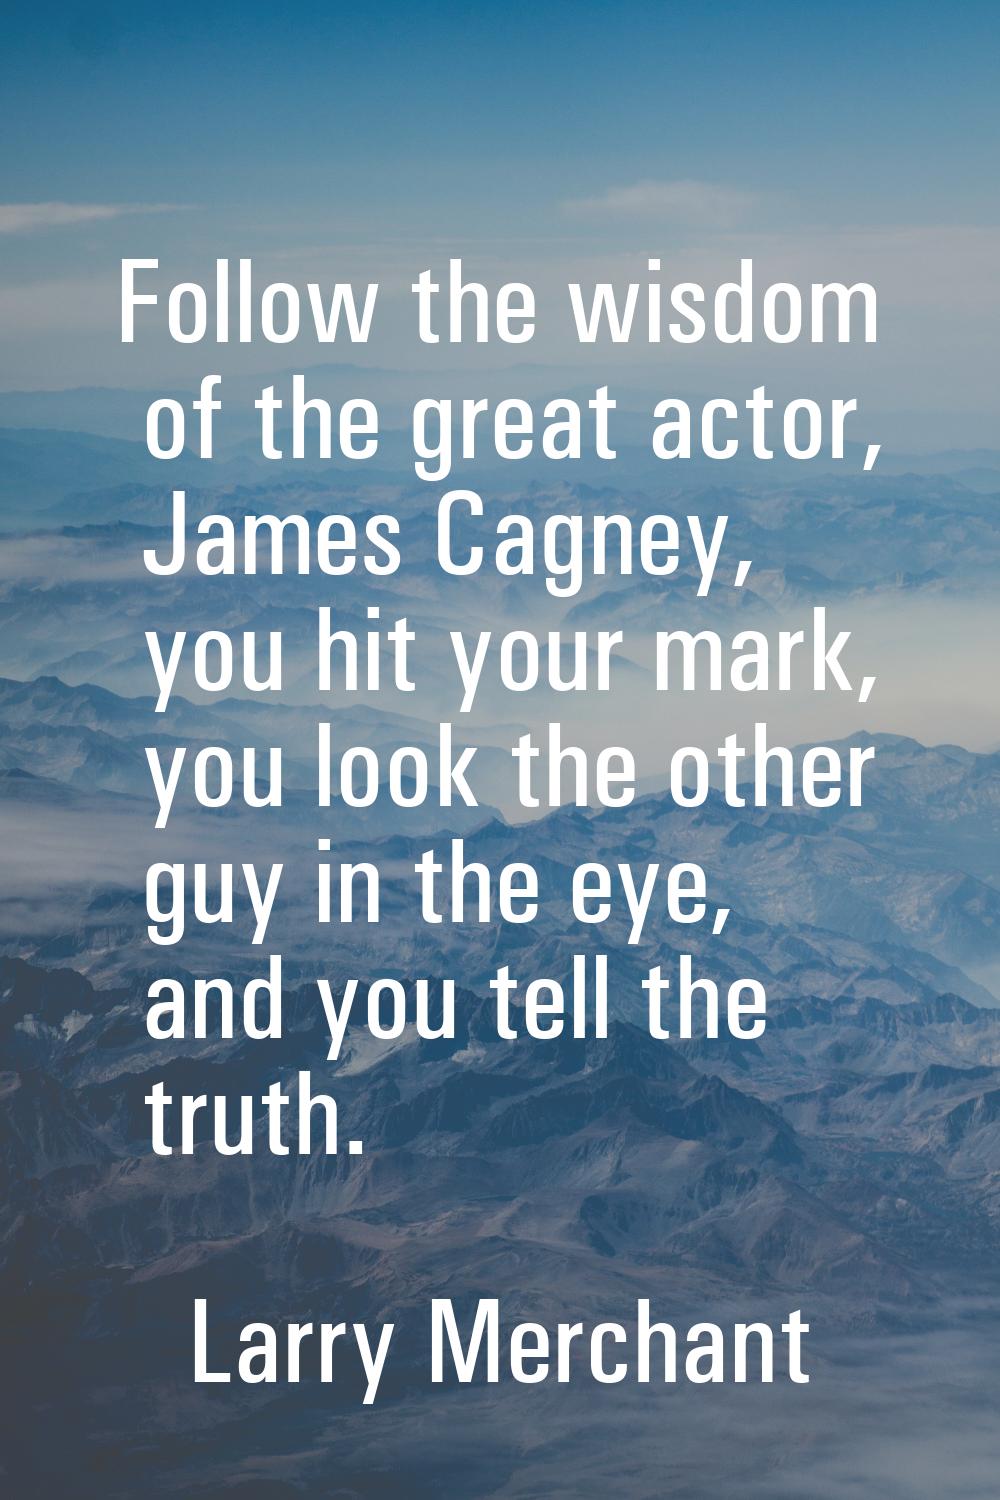 Follow the wisdom of the great actor, James Cagney, you hit your mark, you look the other guy in th